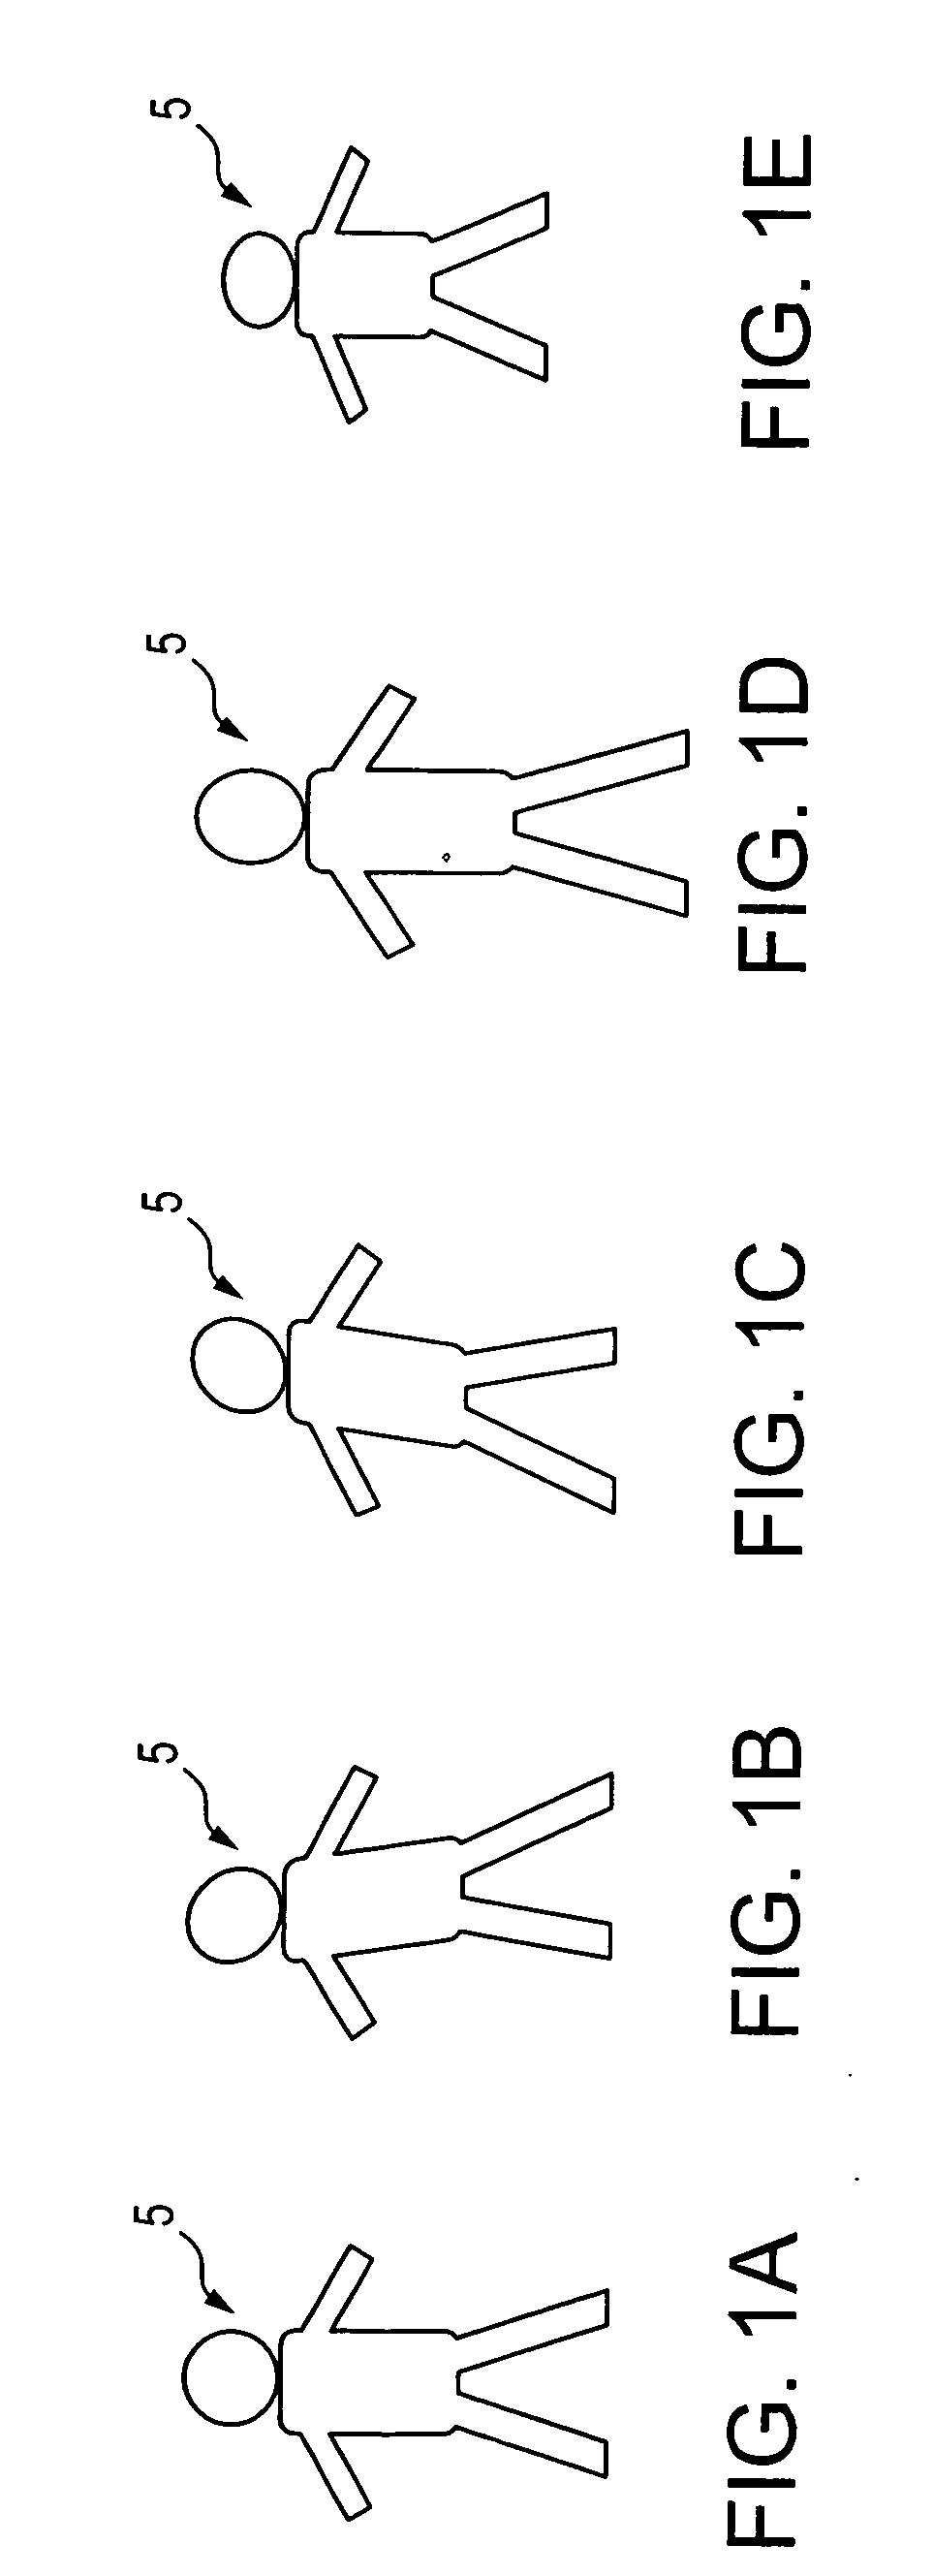 Methods and system for digitally stabilizing video captured from rolling shutter cameras